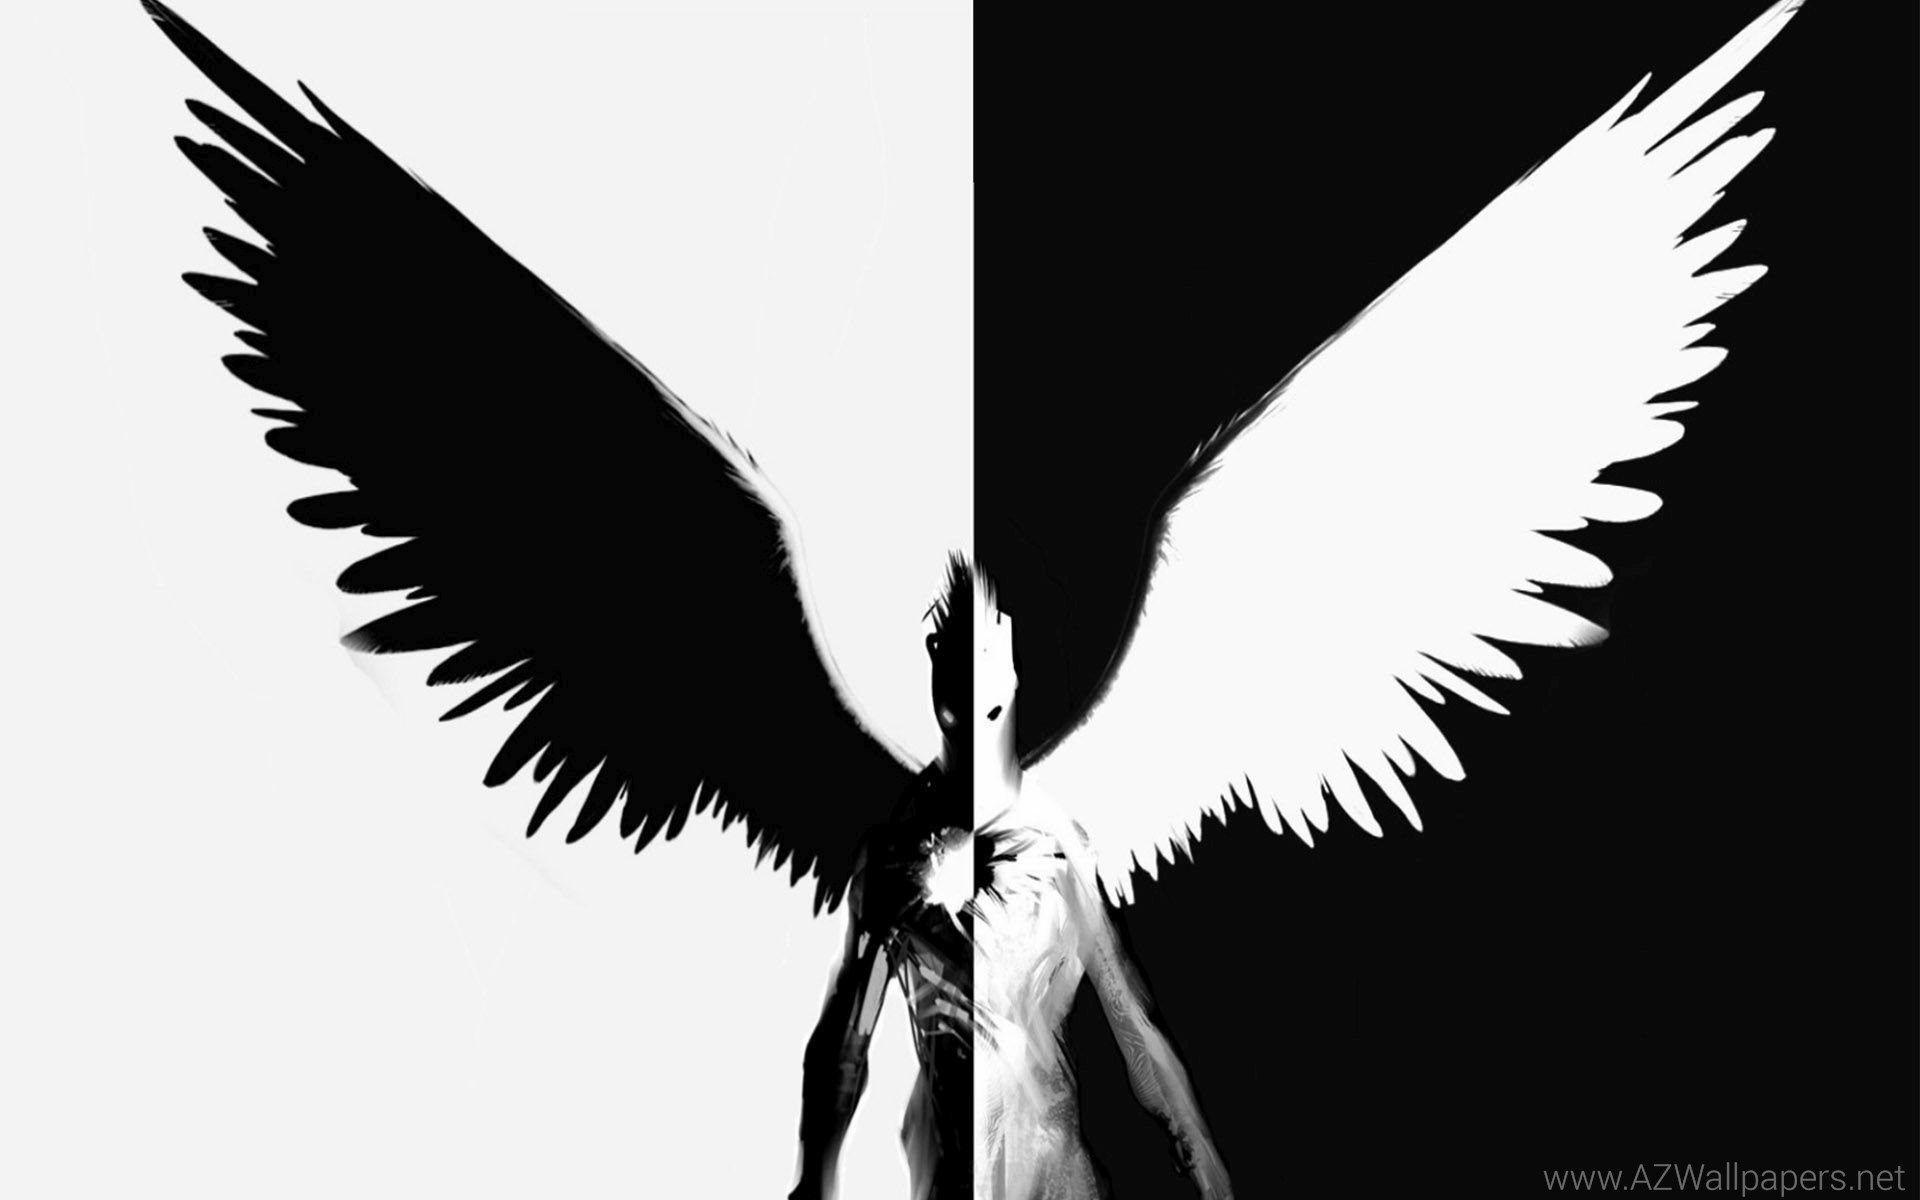 Share more than 71 angel and demon wallpaper - in.cdgdbentre